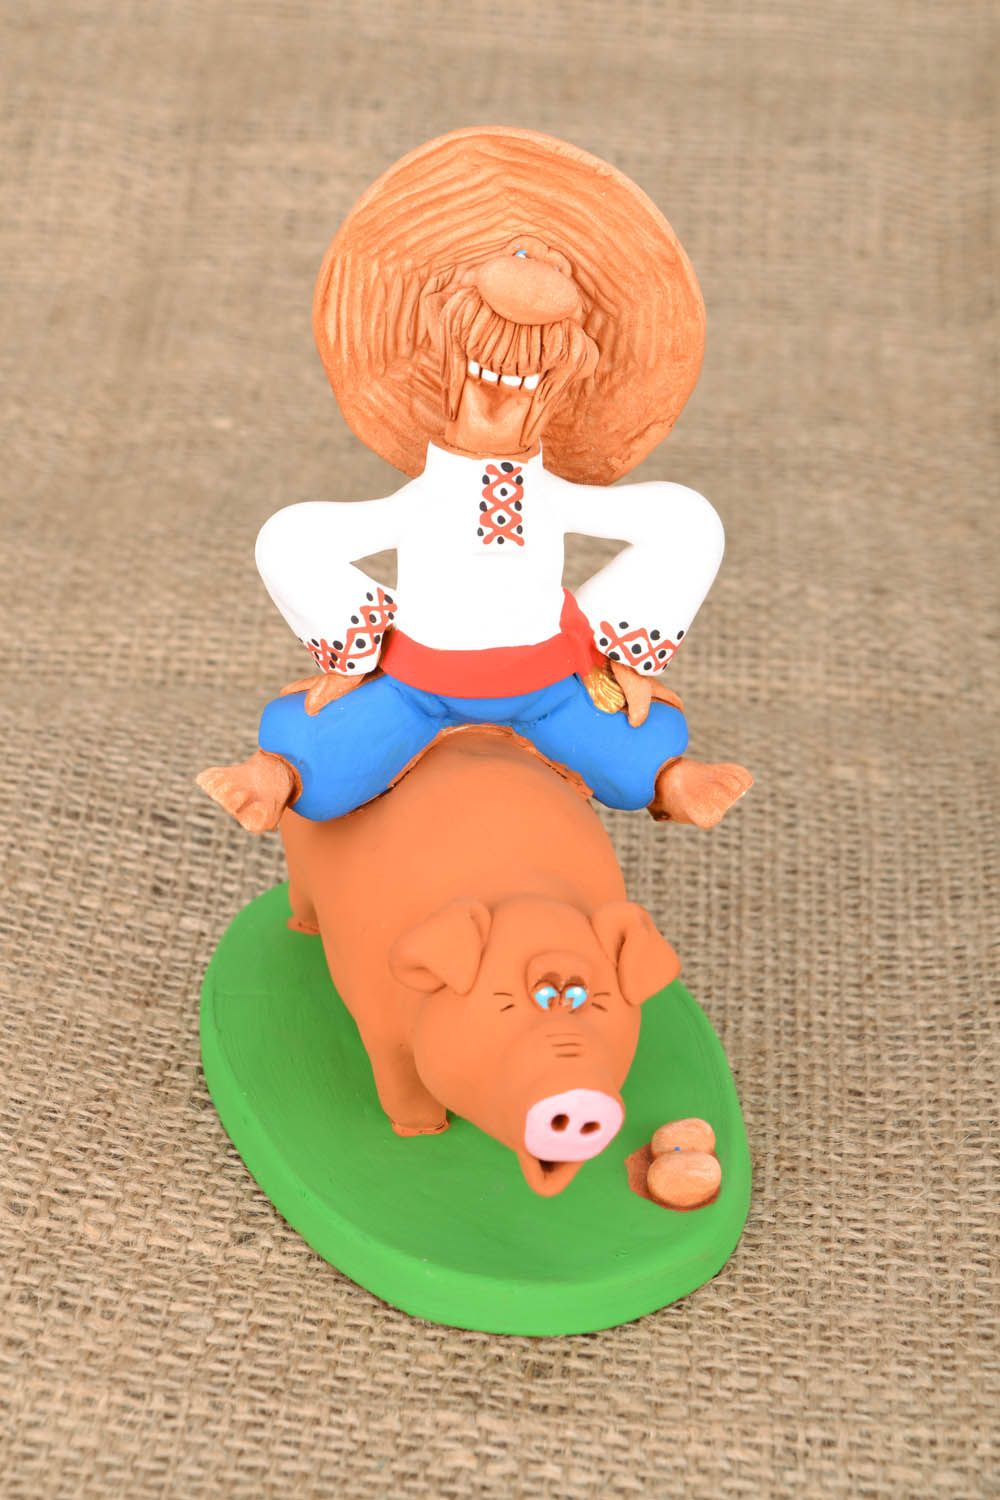 Homemade clay statuette Cossack Riding a Pig photo 1